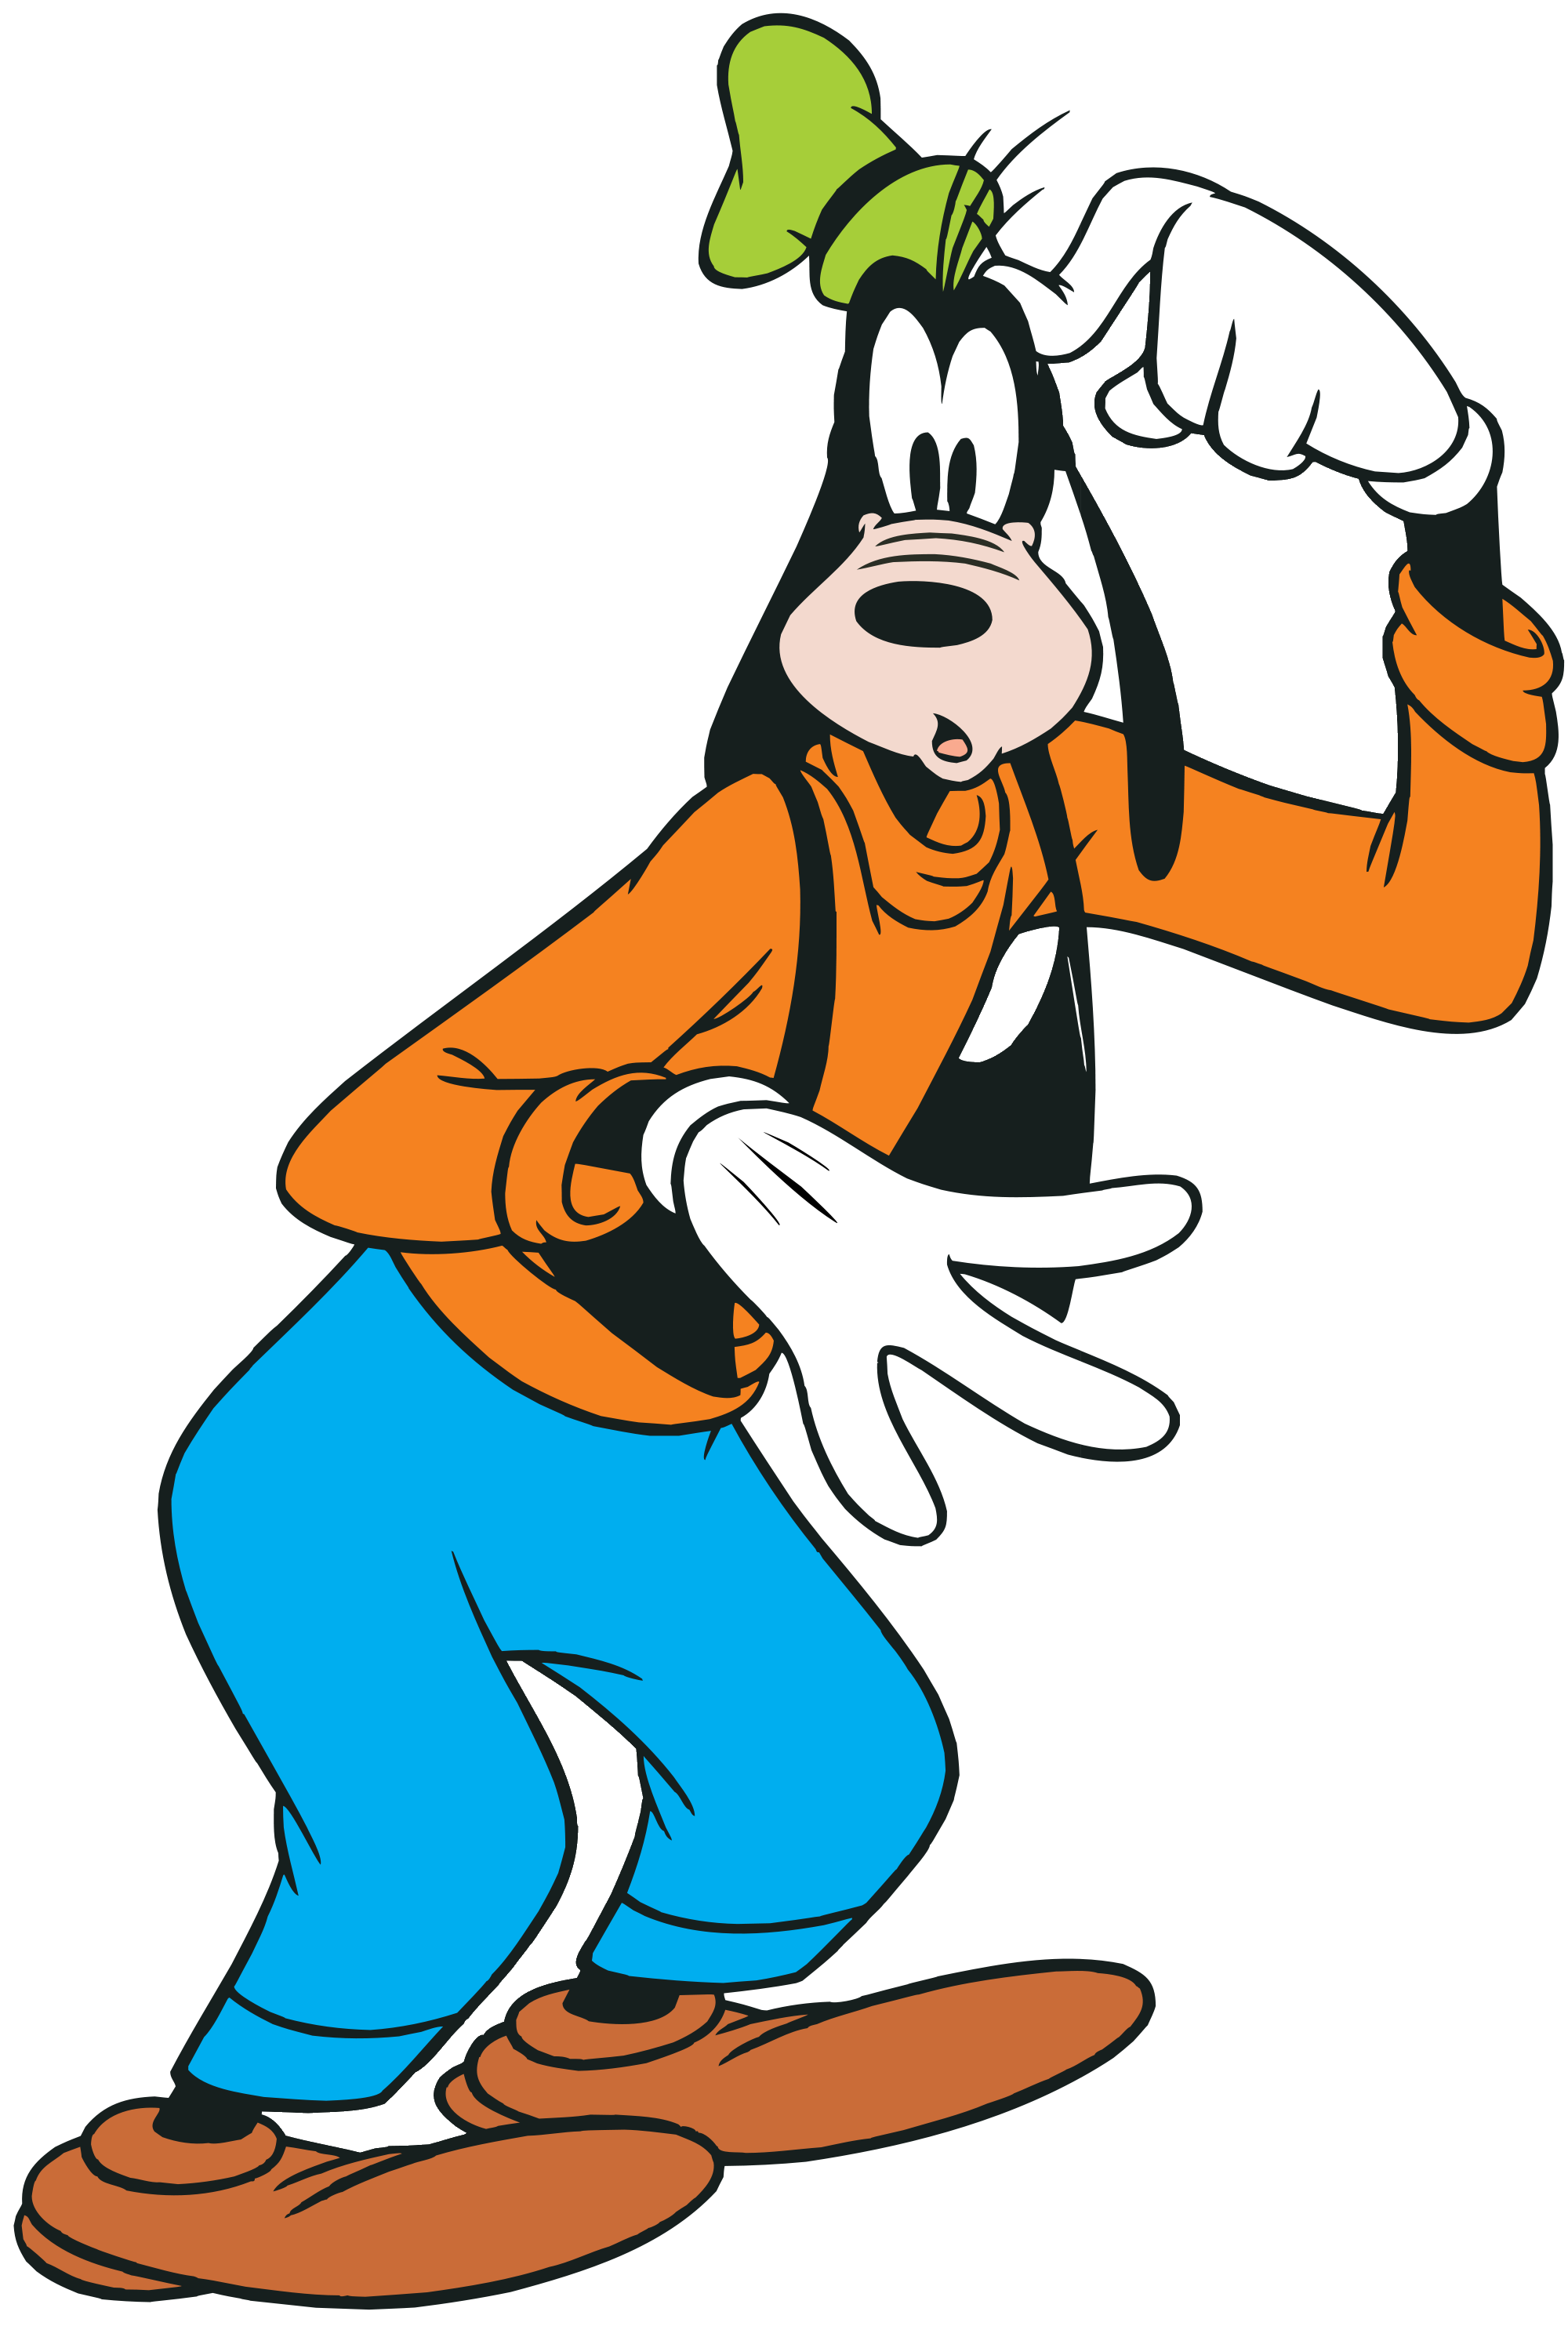 Download Image - Goofy.svg.png | Disney Wiki | FANDOM powered by Wikia